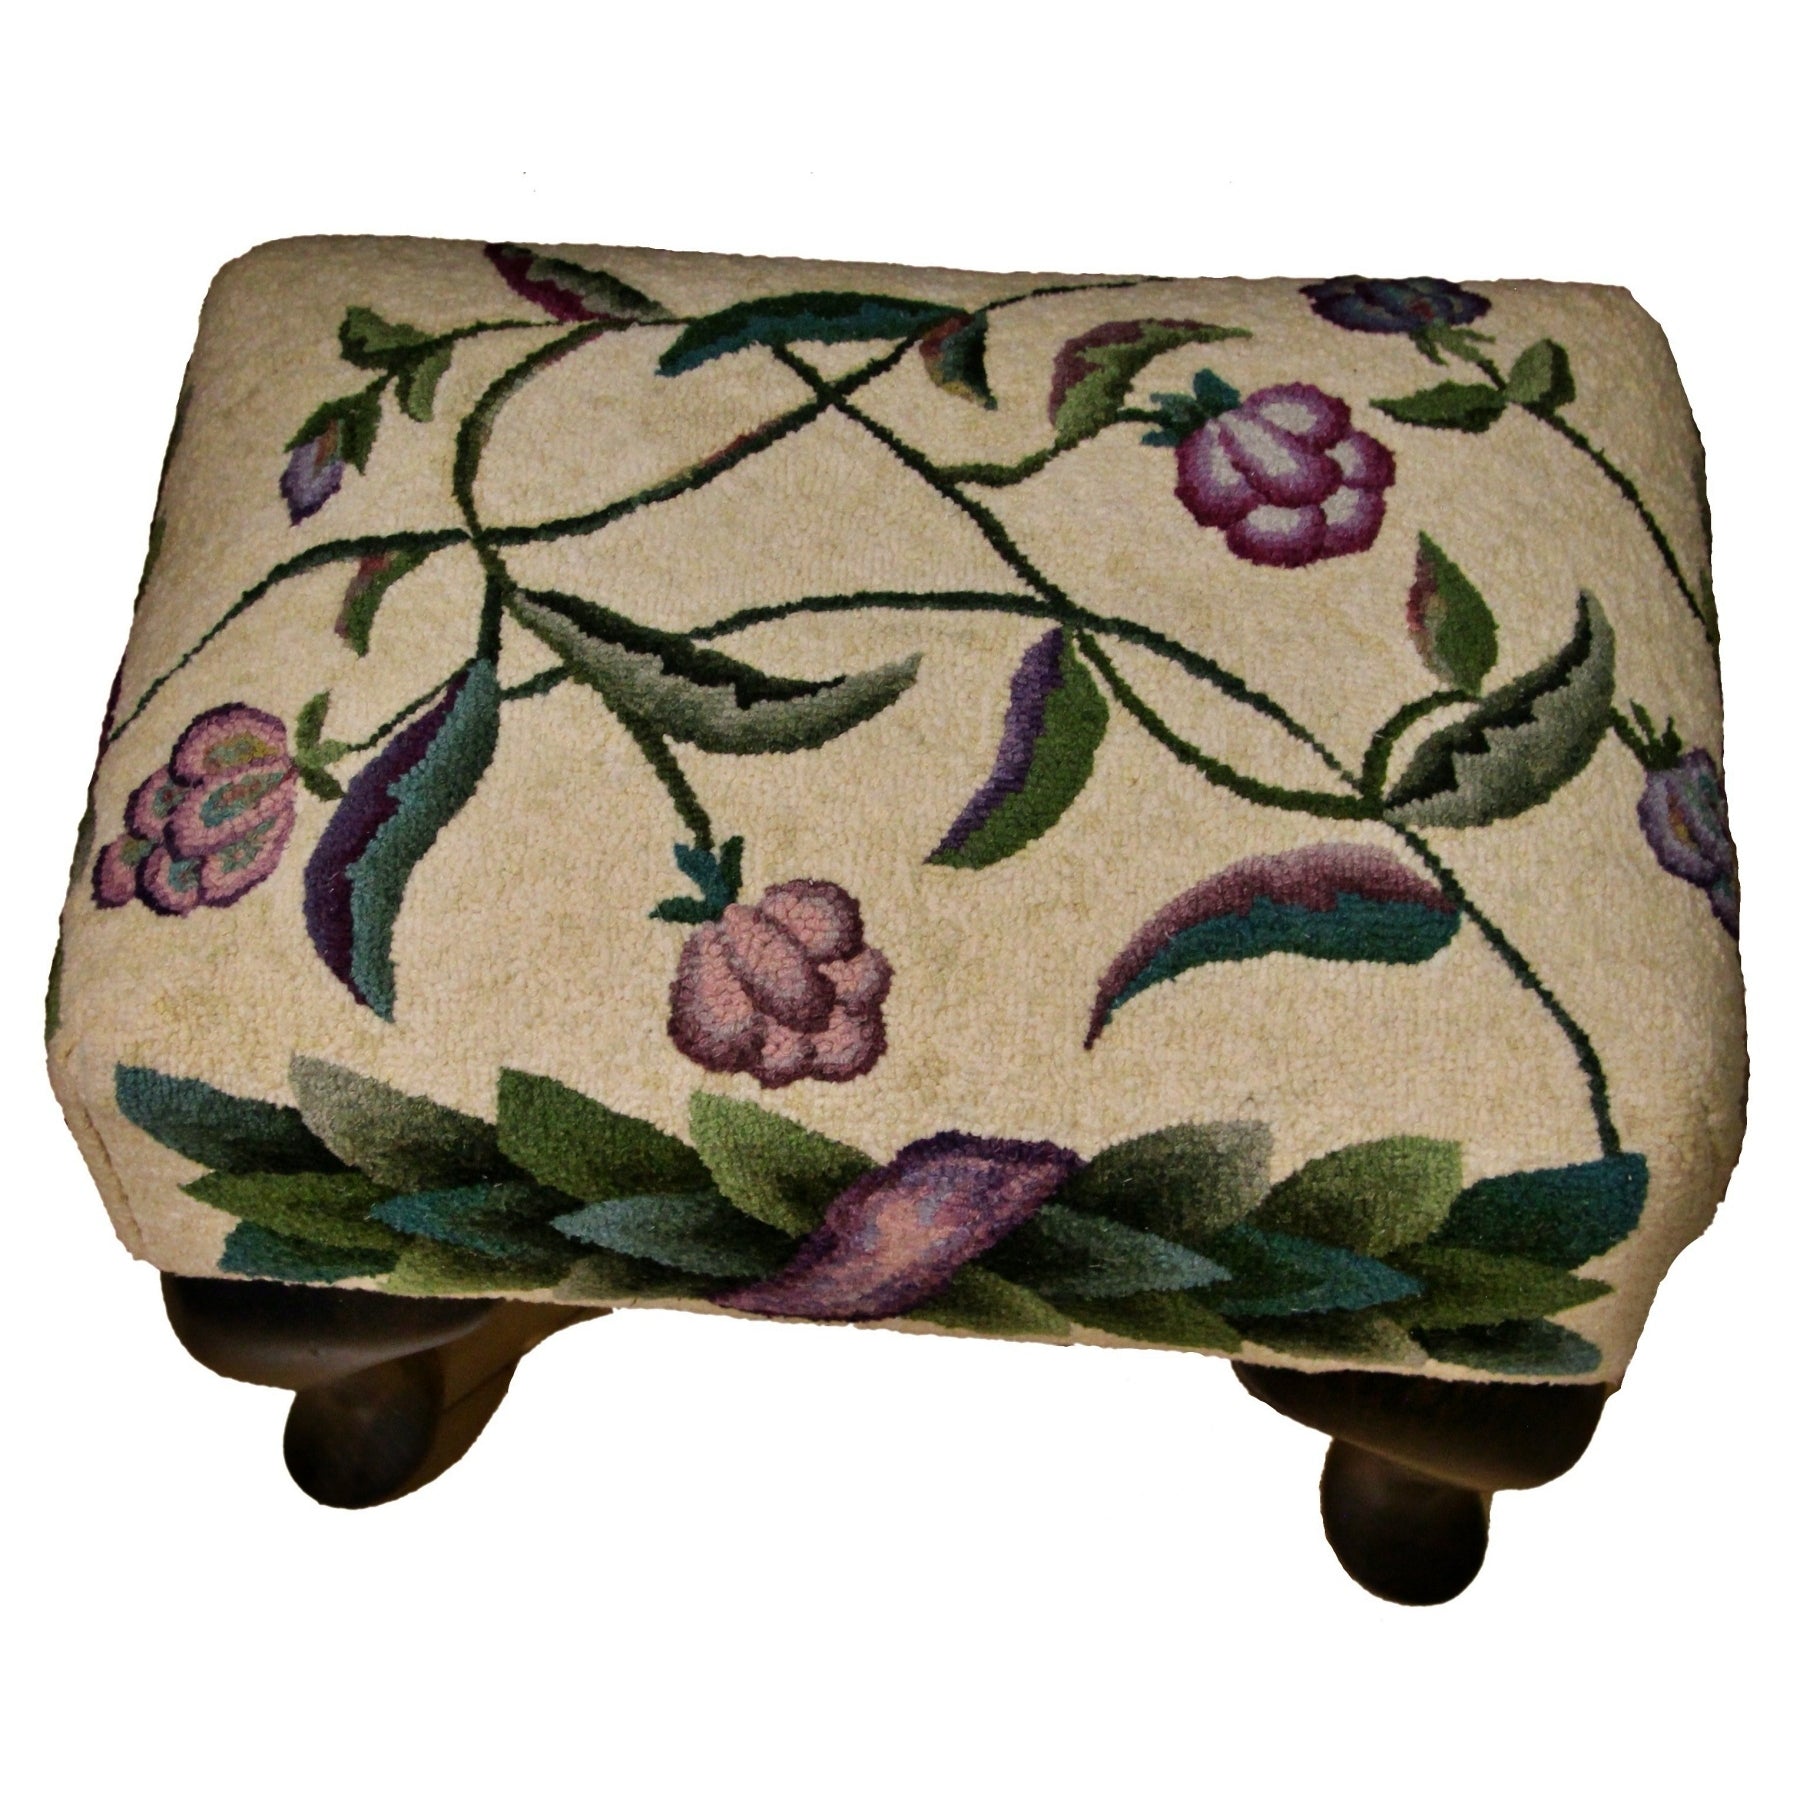 Vines, Fine Cut - Queen Anne Footstool Pattern, rug hooked by Peggy Hannum